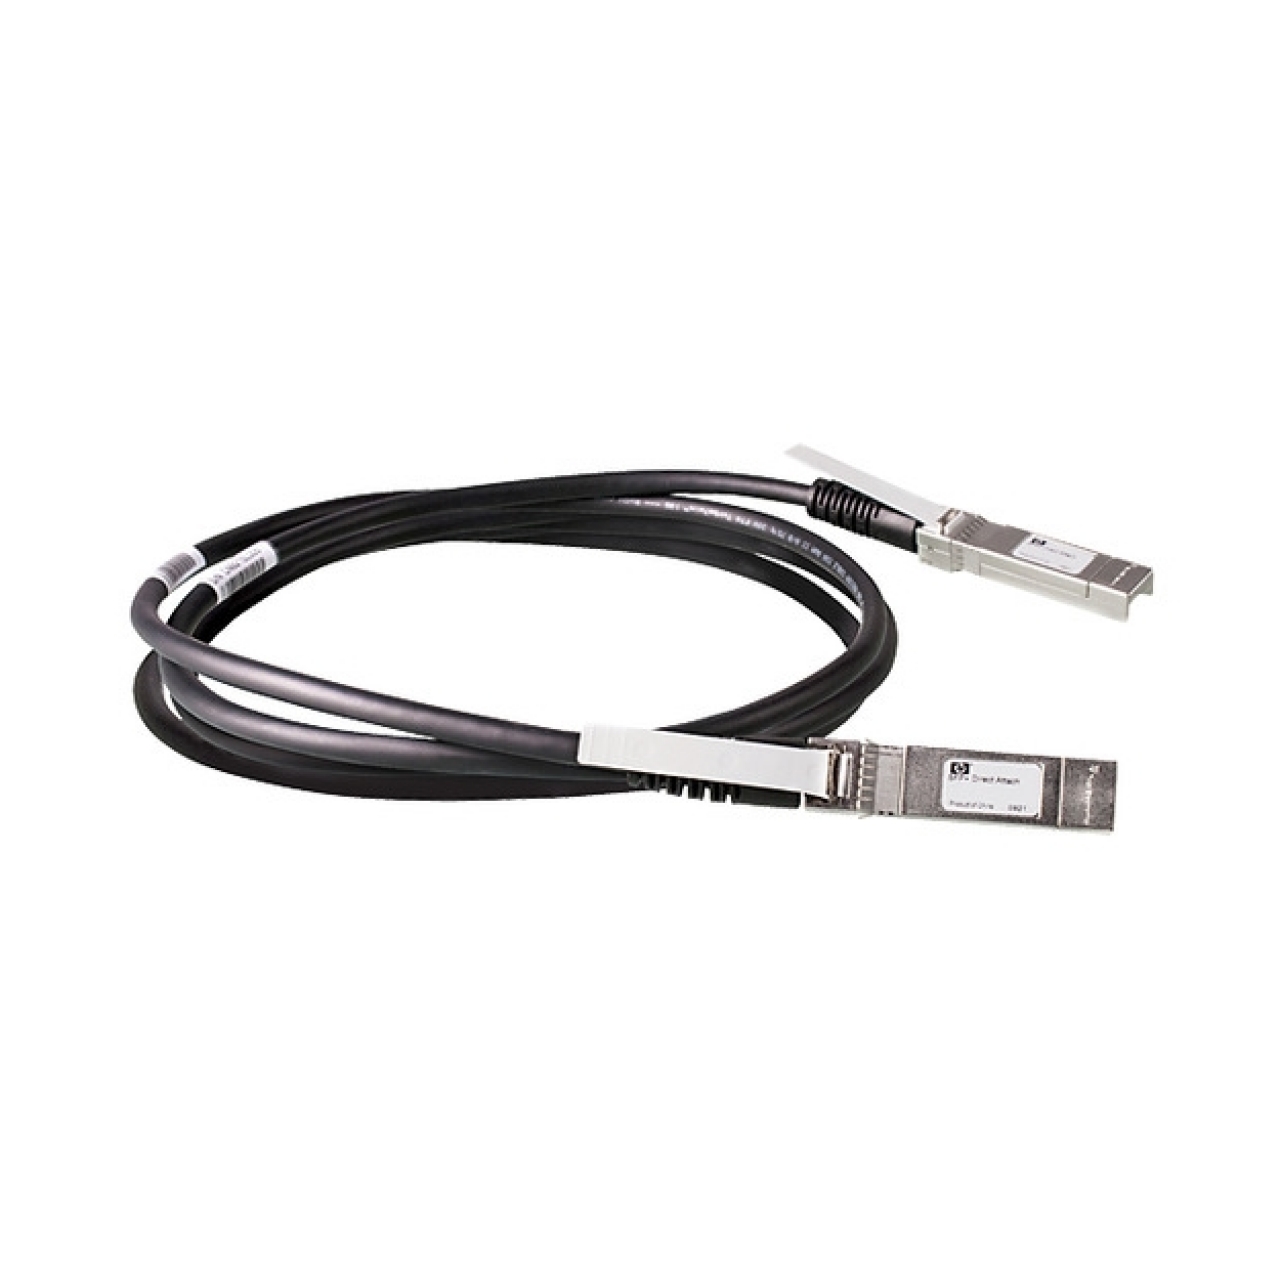 HPE X242 J9283D 10G SFP+ to SFP+ 3m Direct Attach Copper Cable